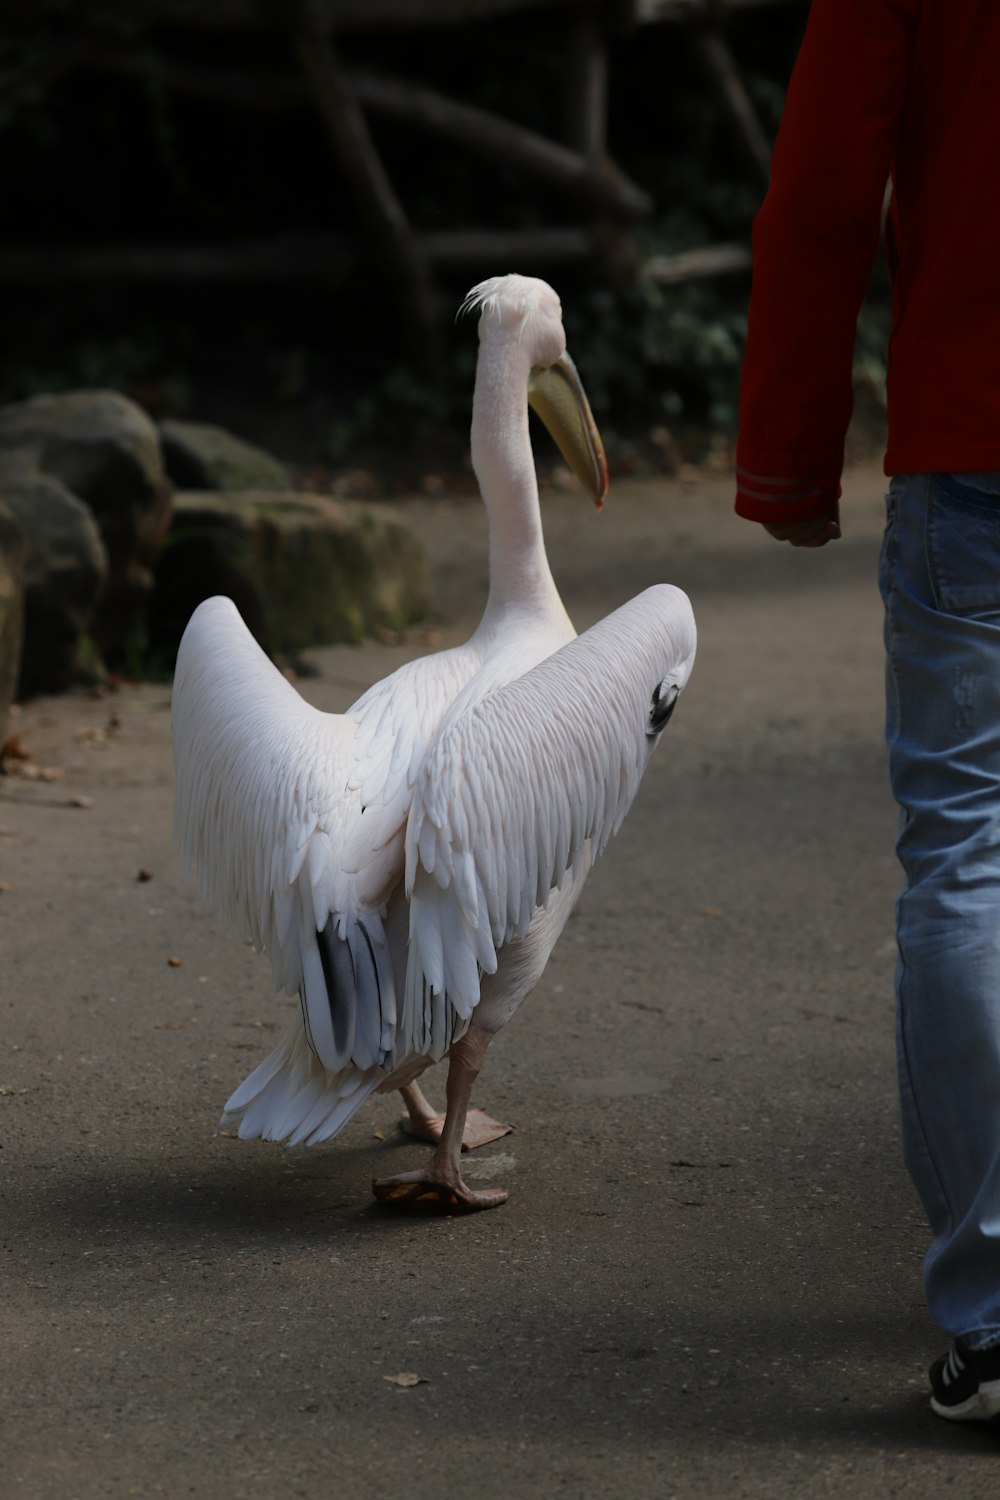 a large white bird standing next to a person